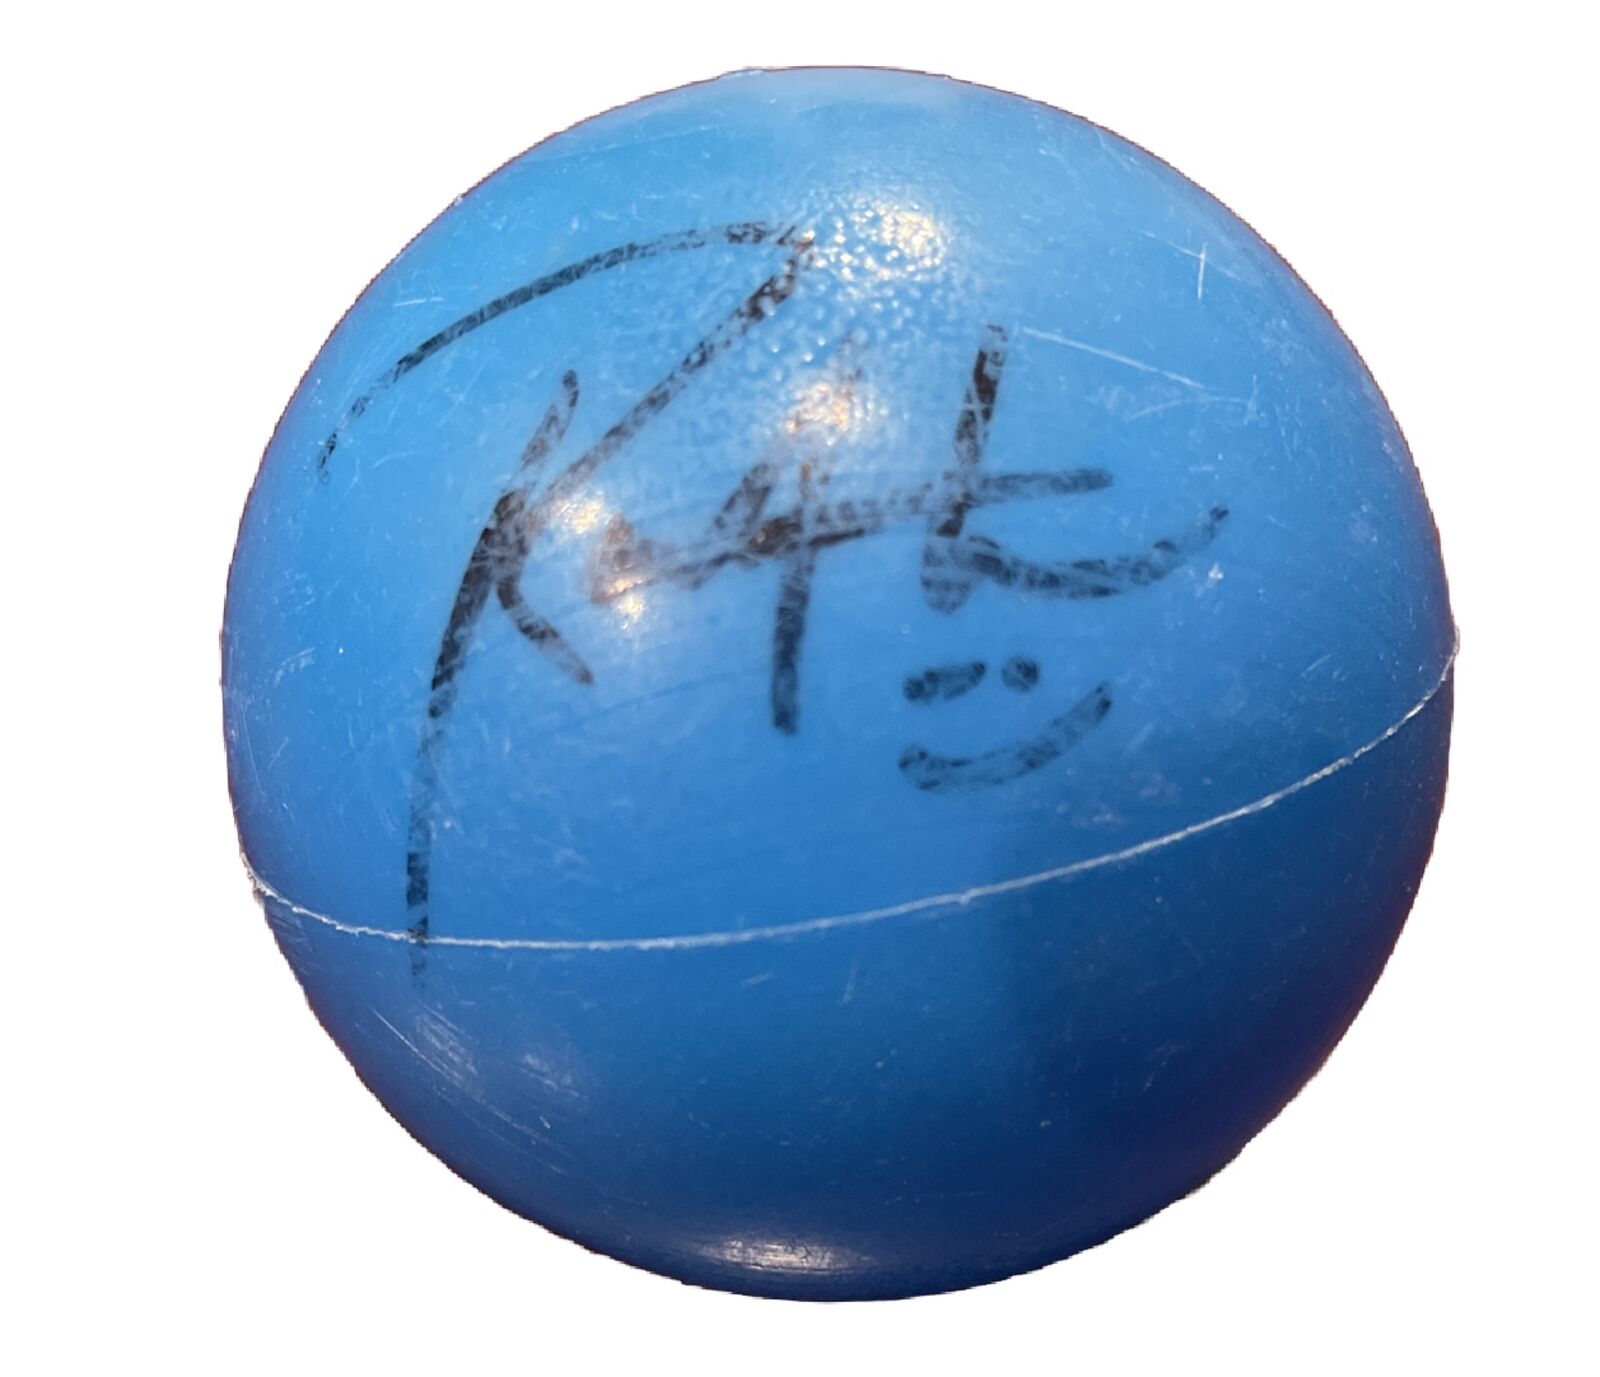 Collectible Limited Roman Atwood Signed Ball 2015 Crazy Plastic Ball Prank Video